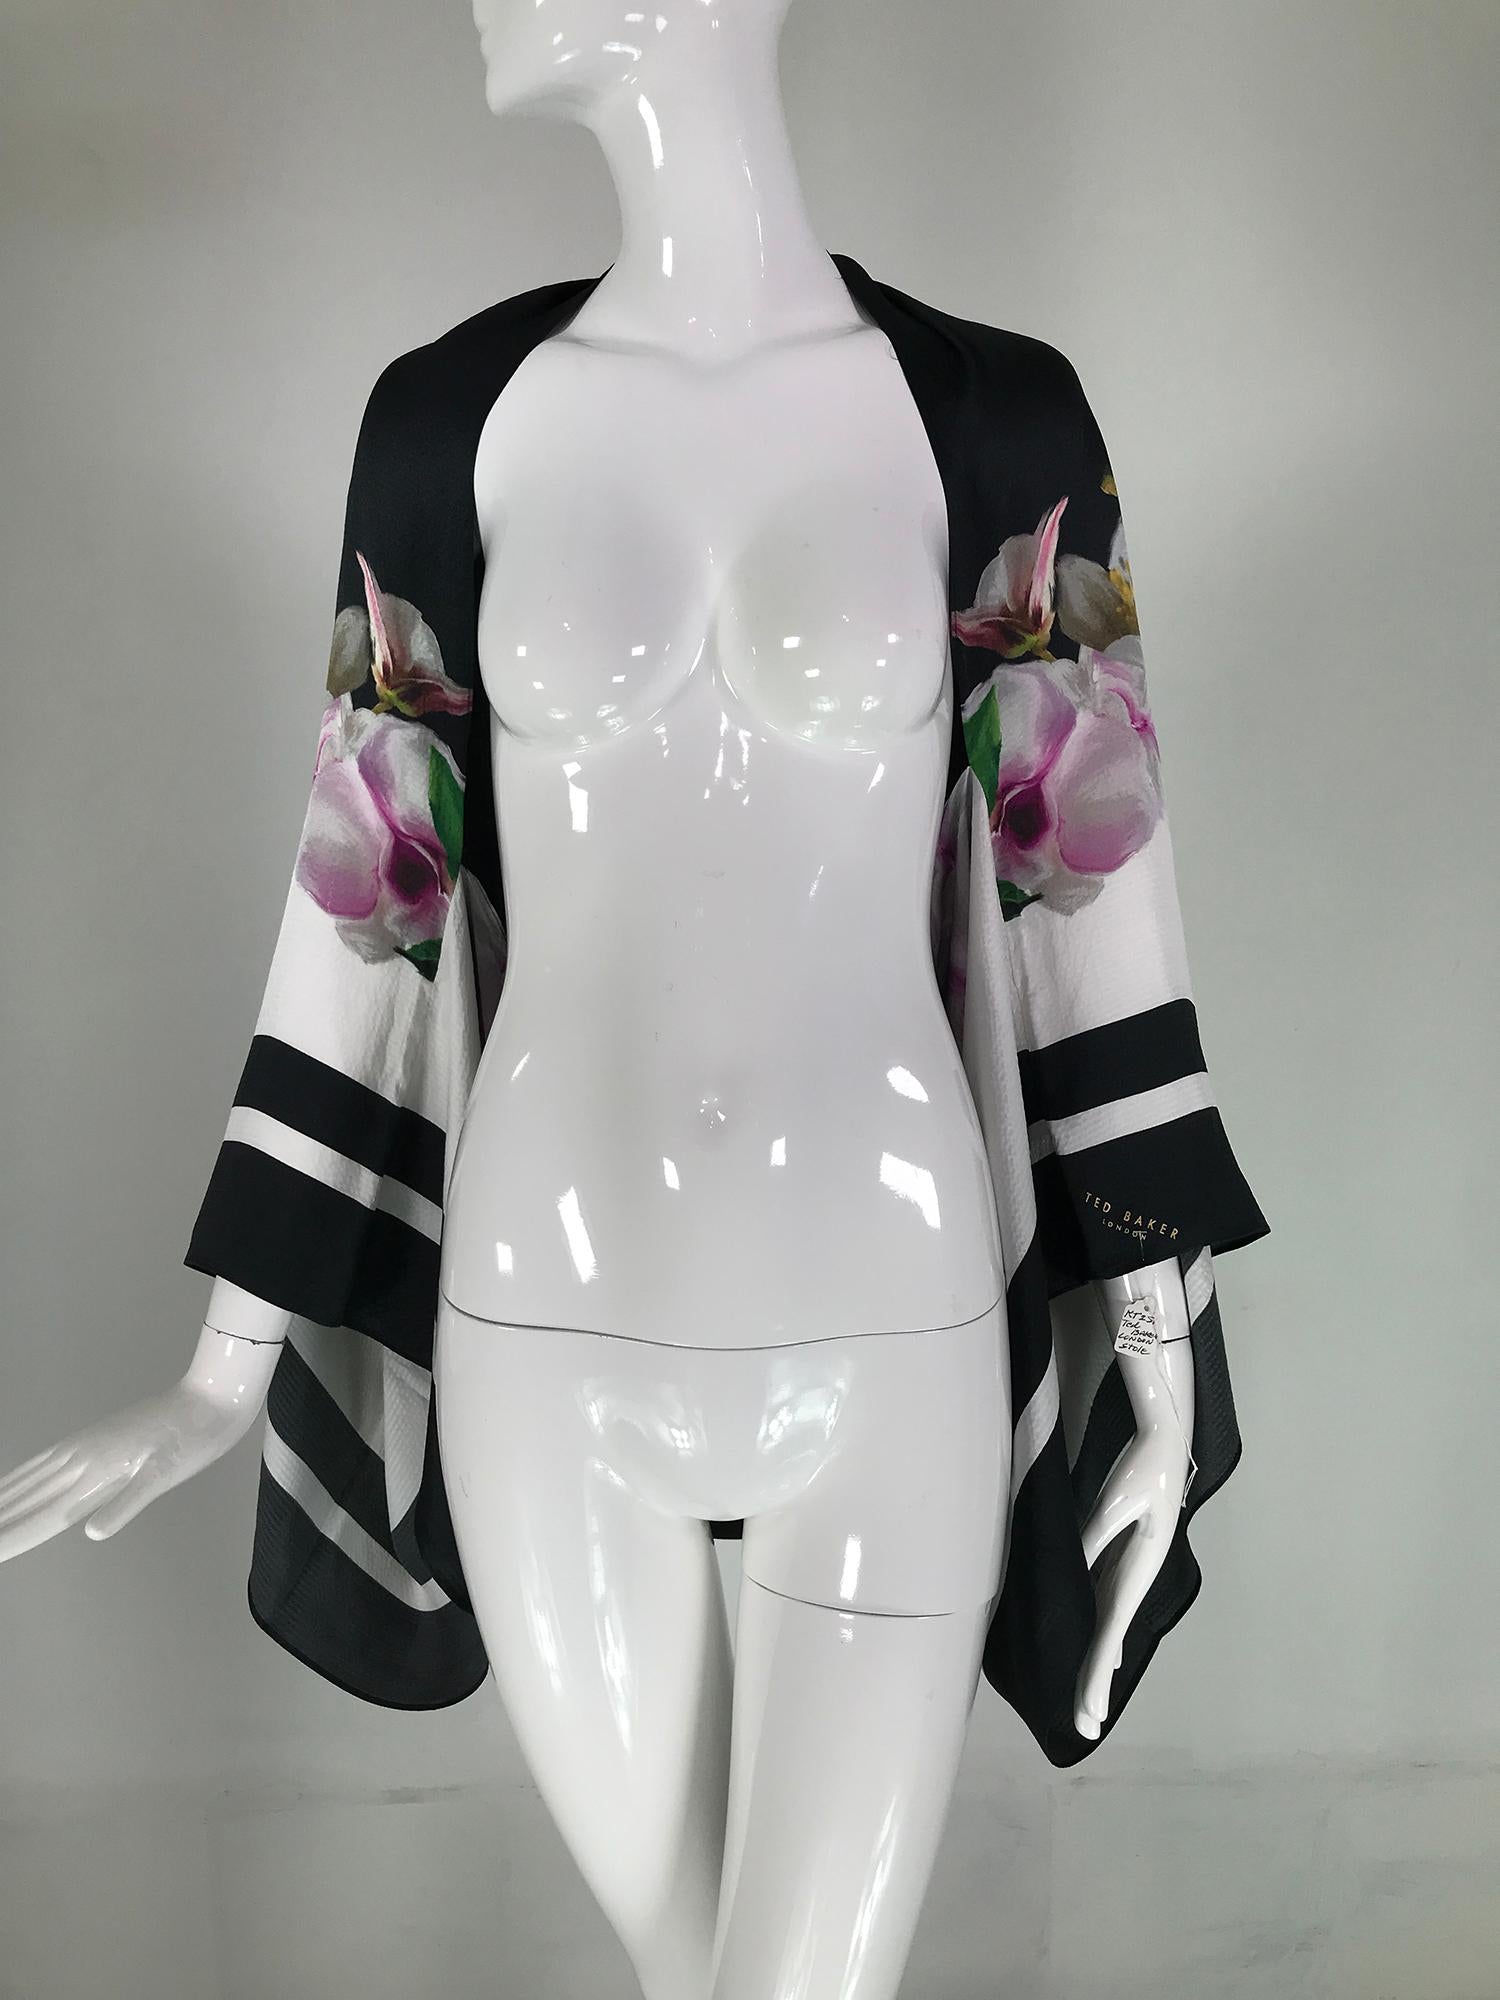 Ted Baker London floral silk kimono shrug. Kimono sleeve slip on shrug, perfect for evening or home. In excellent condition. 54